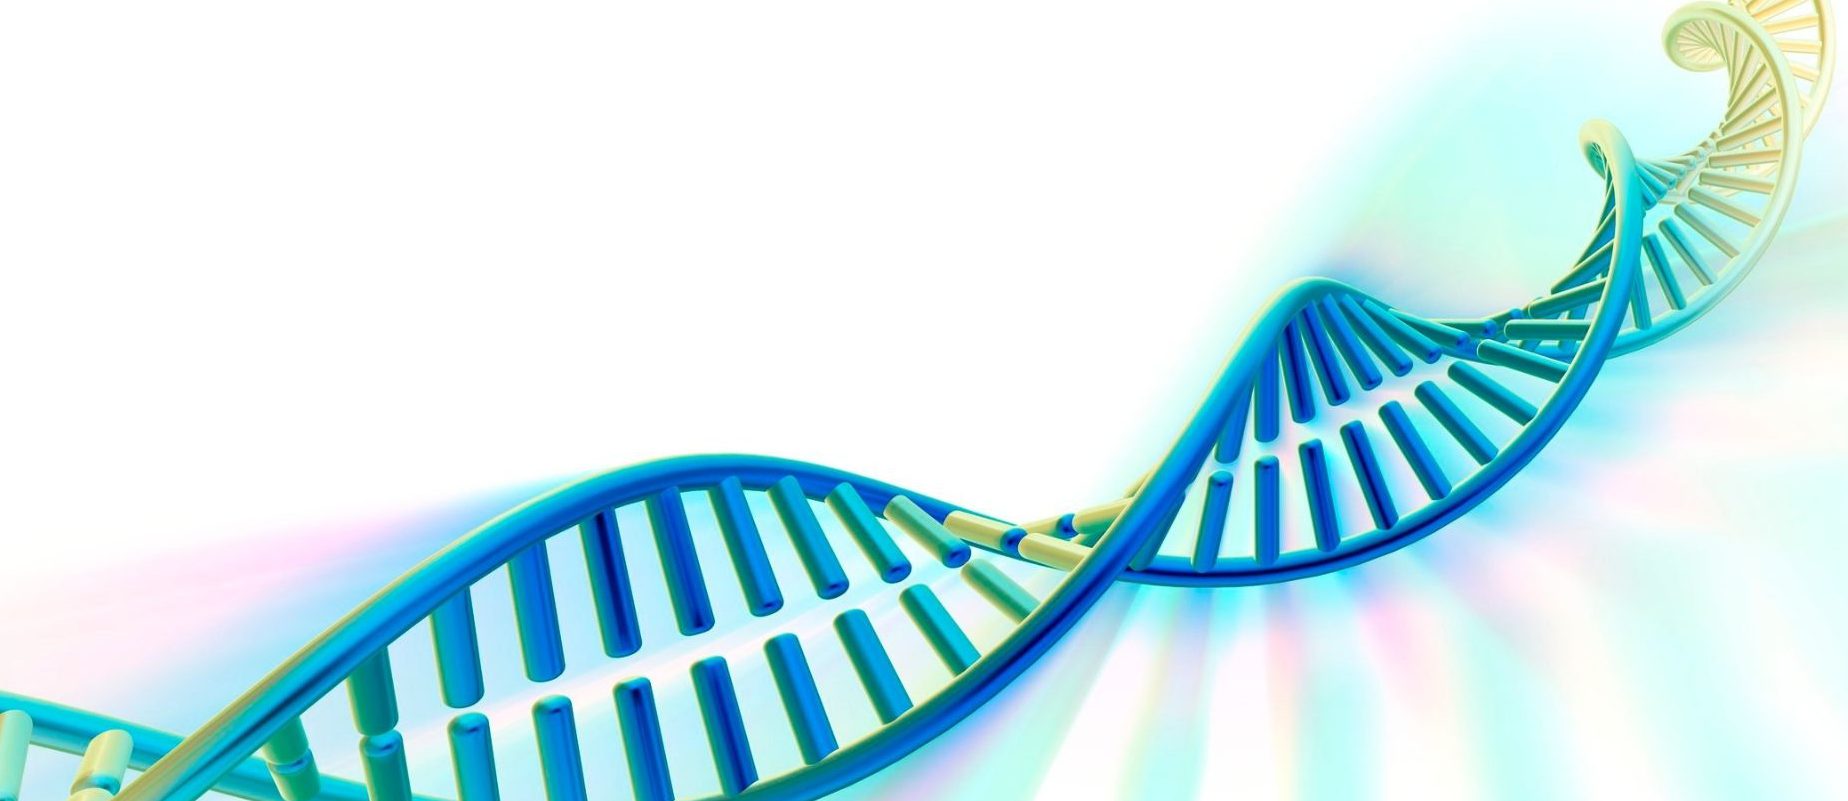 Global Nucleic Acid Based Gene Therapy Market